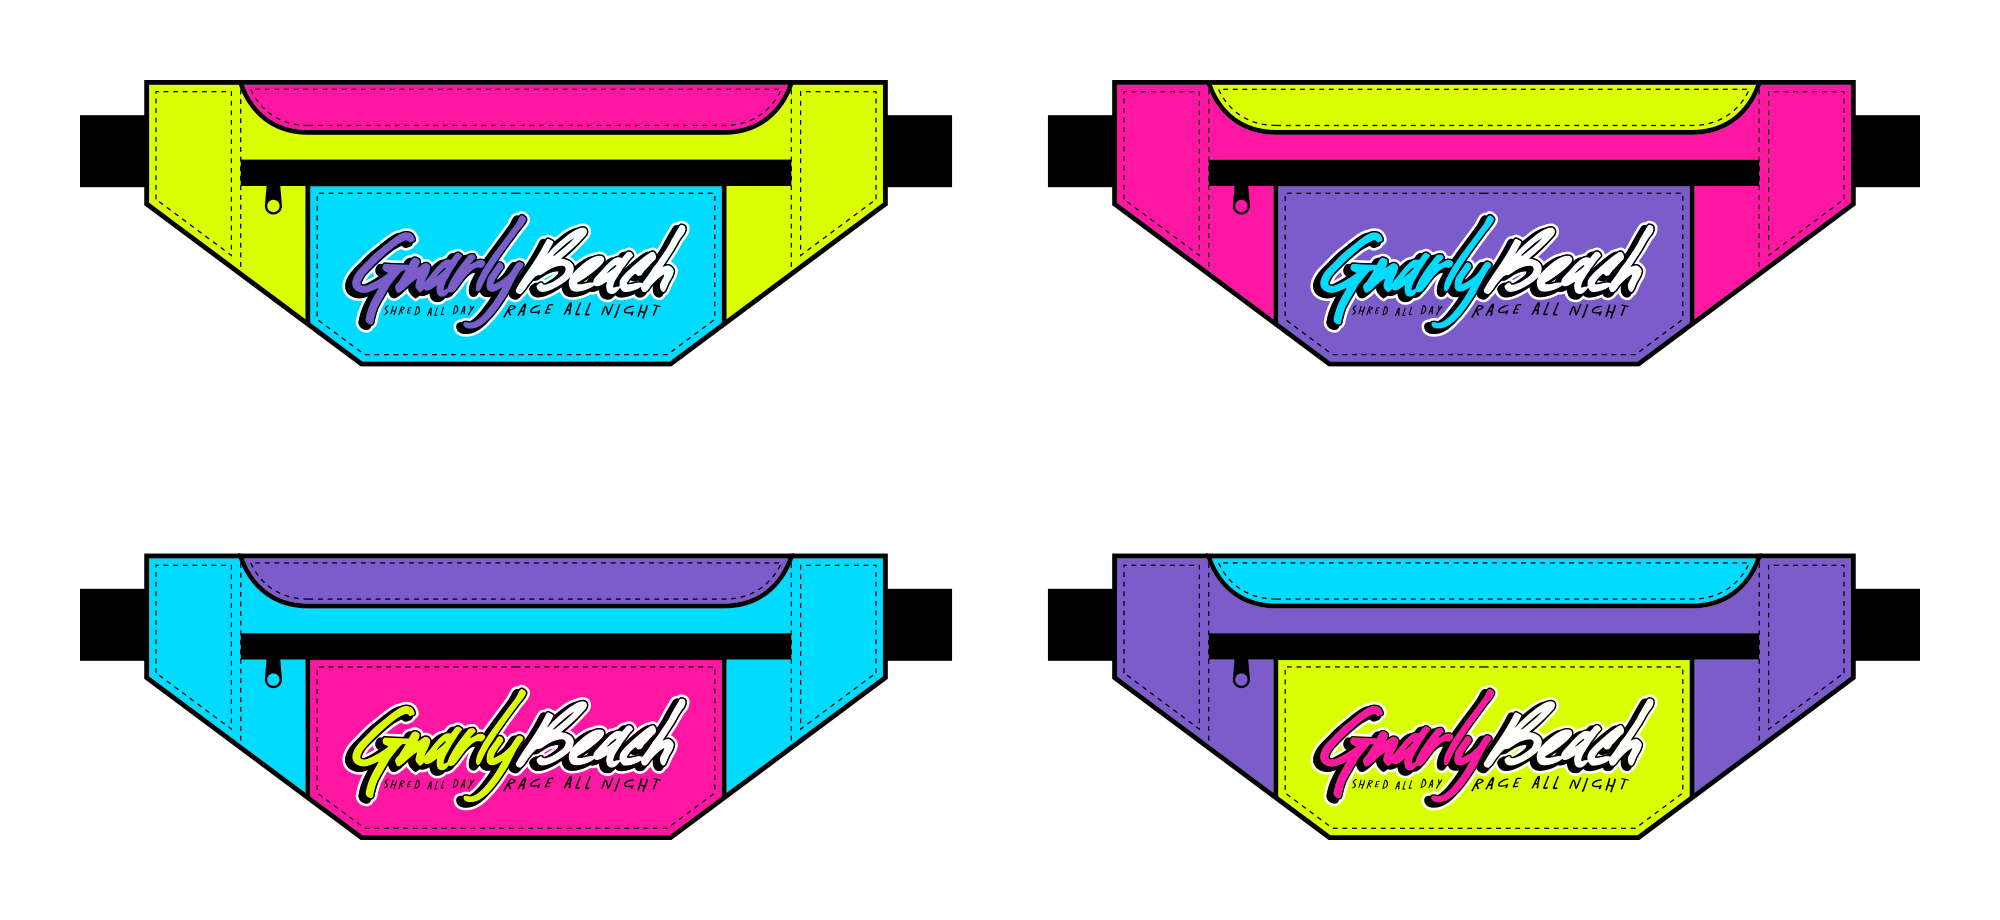 gnarly beach, lifestyle brands, fanny pack, neon, beach wear, festival clothing, party pack, beach wear, california clothing, gnarly pouch